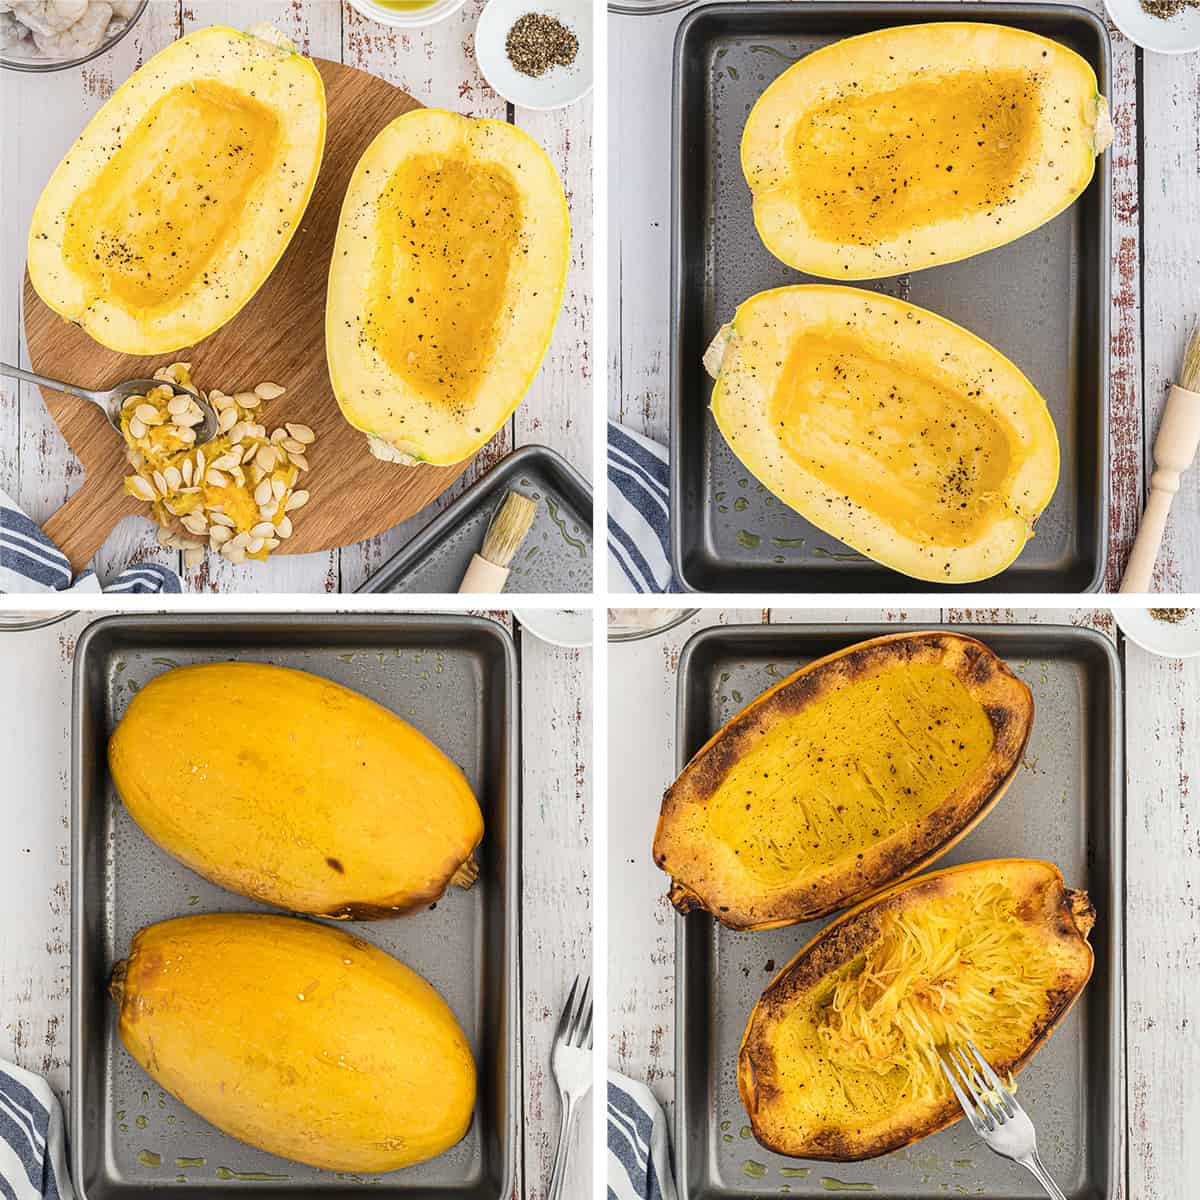 Four images of a halved spaghetti squash before and after roasting on a baking sheet.